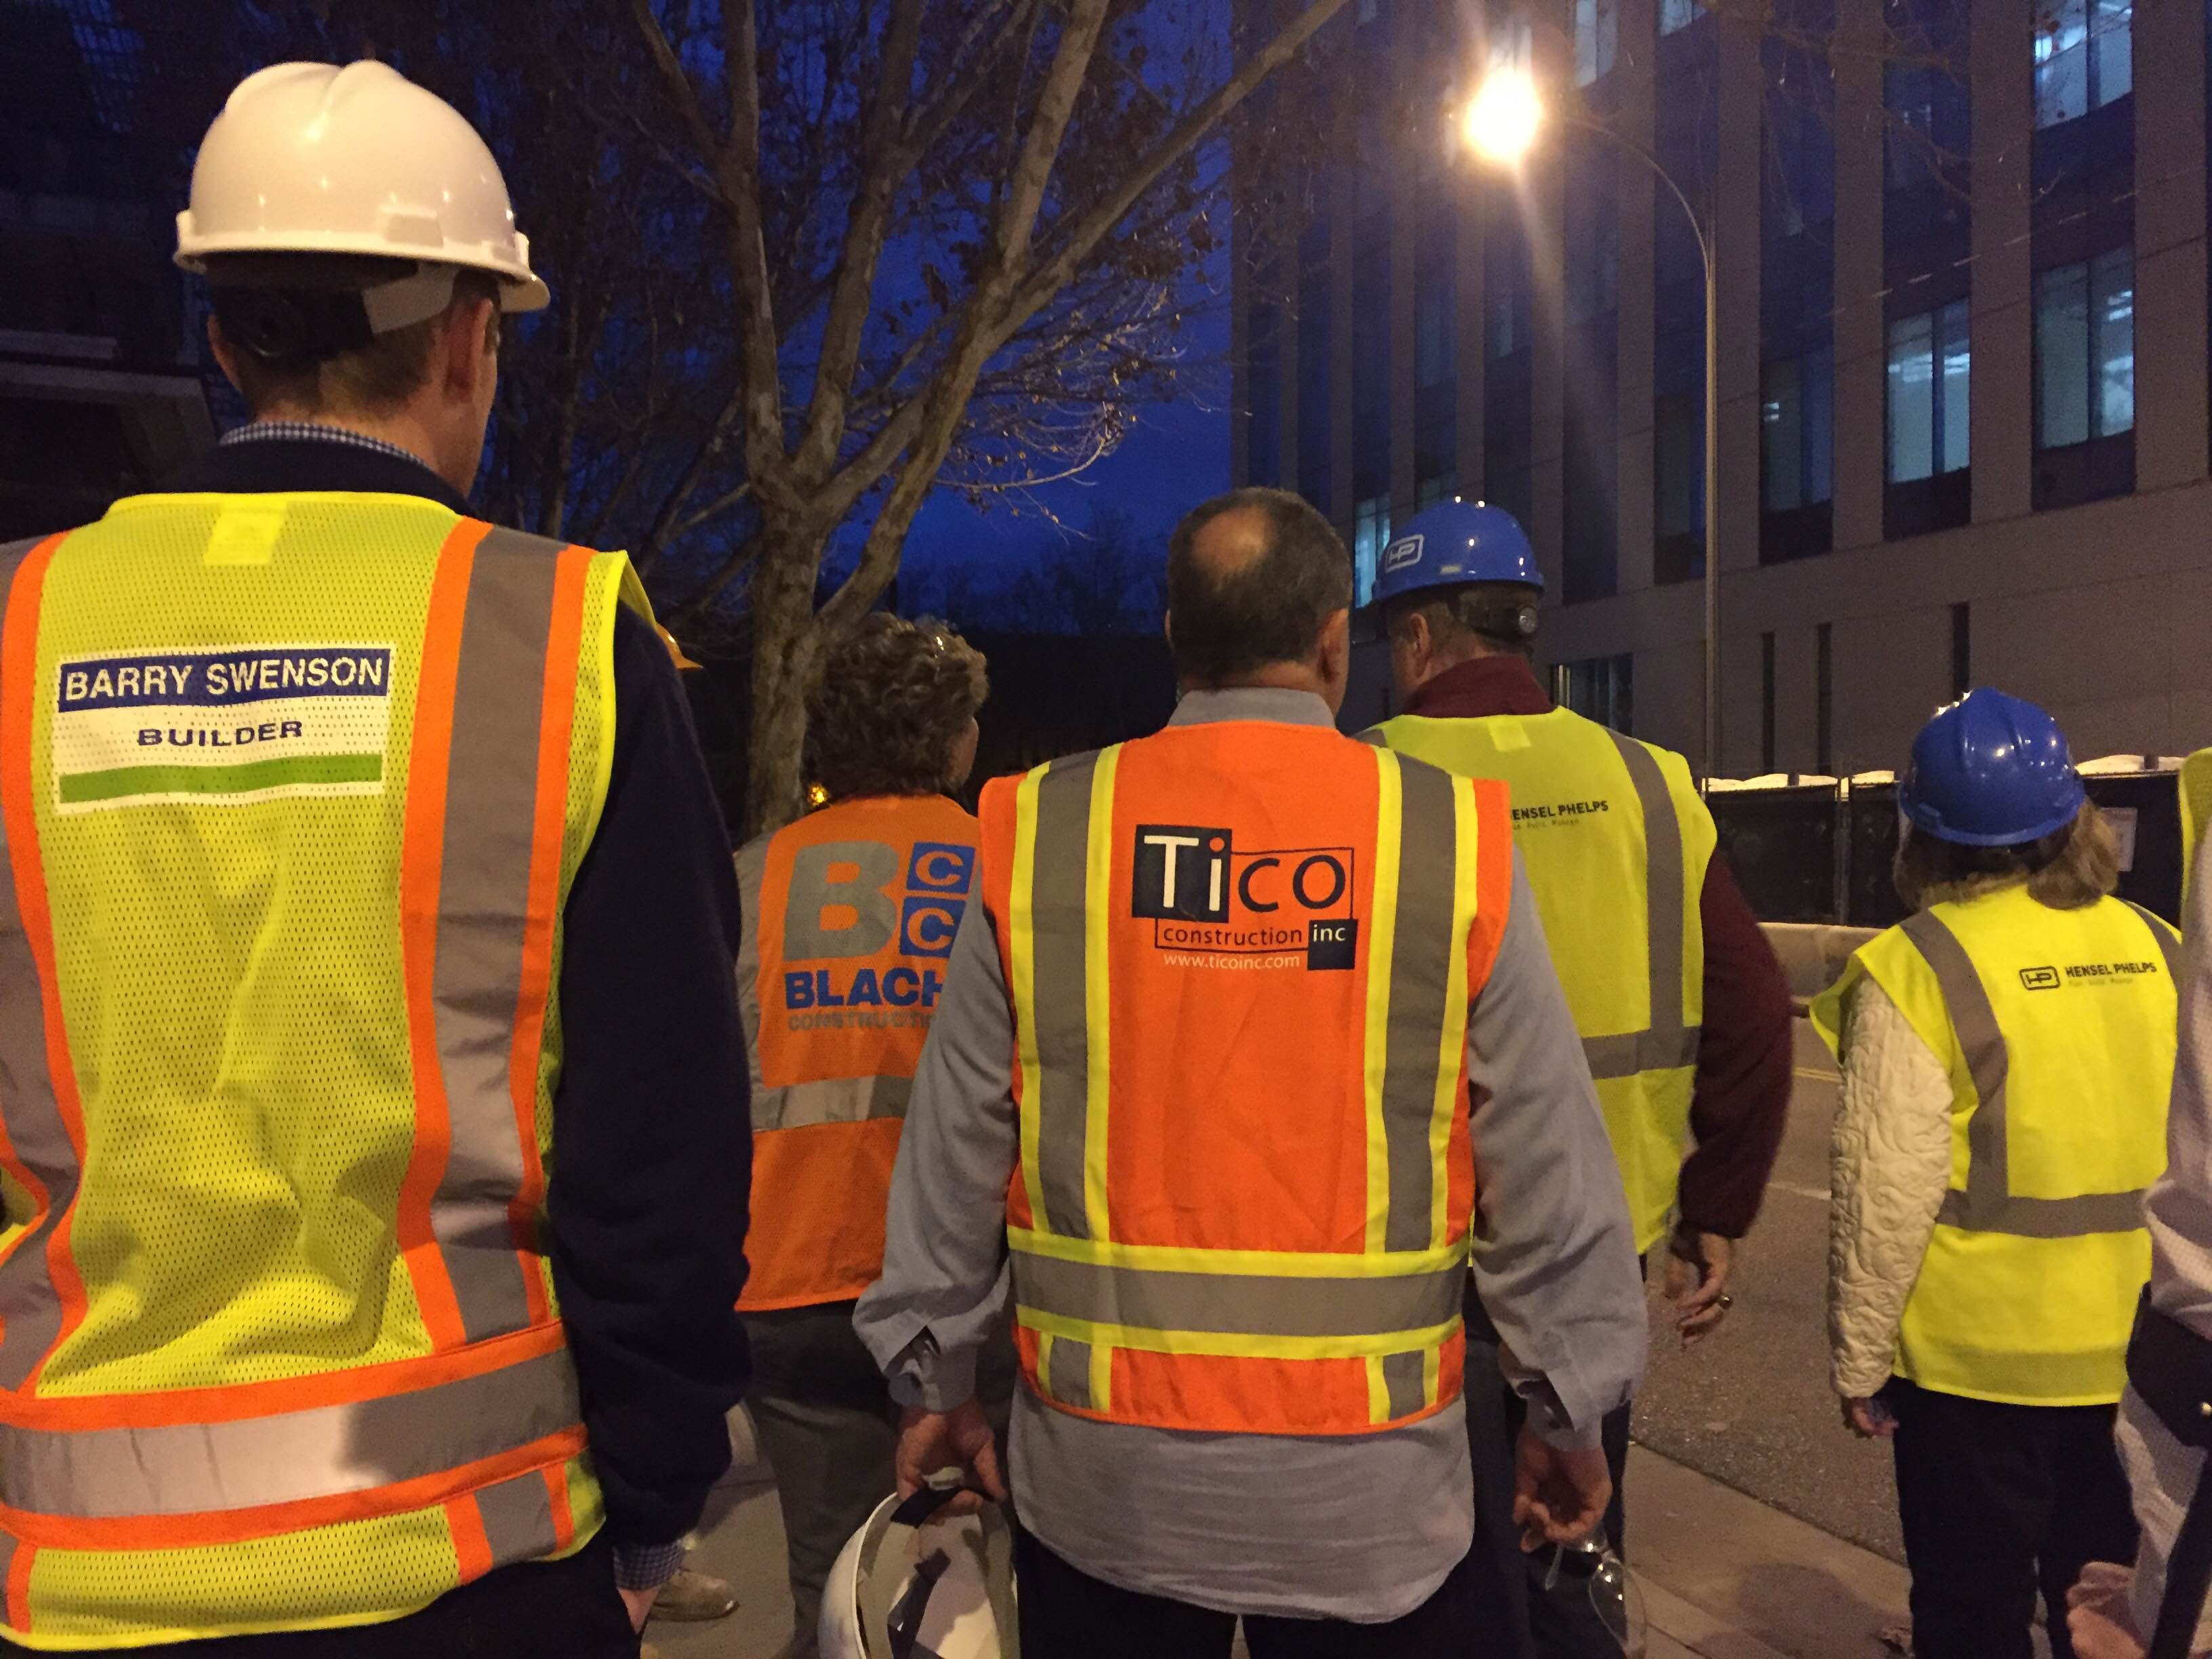 Construction workers in safety gear at night with 